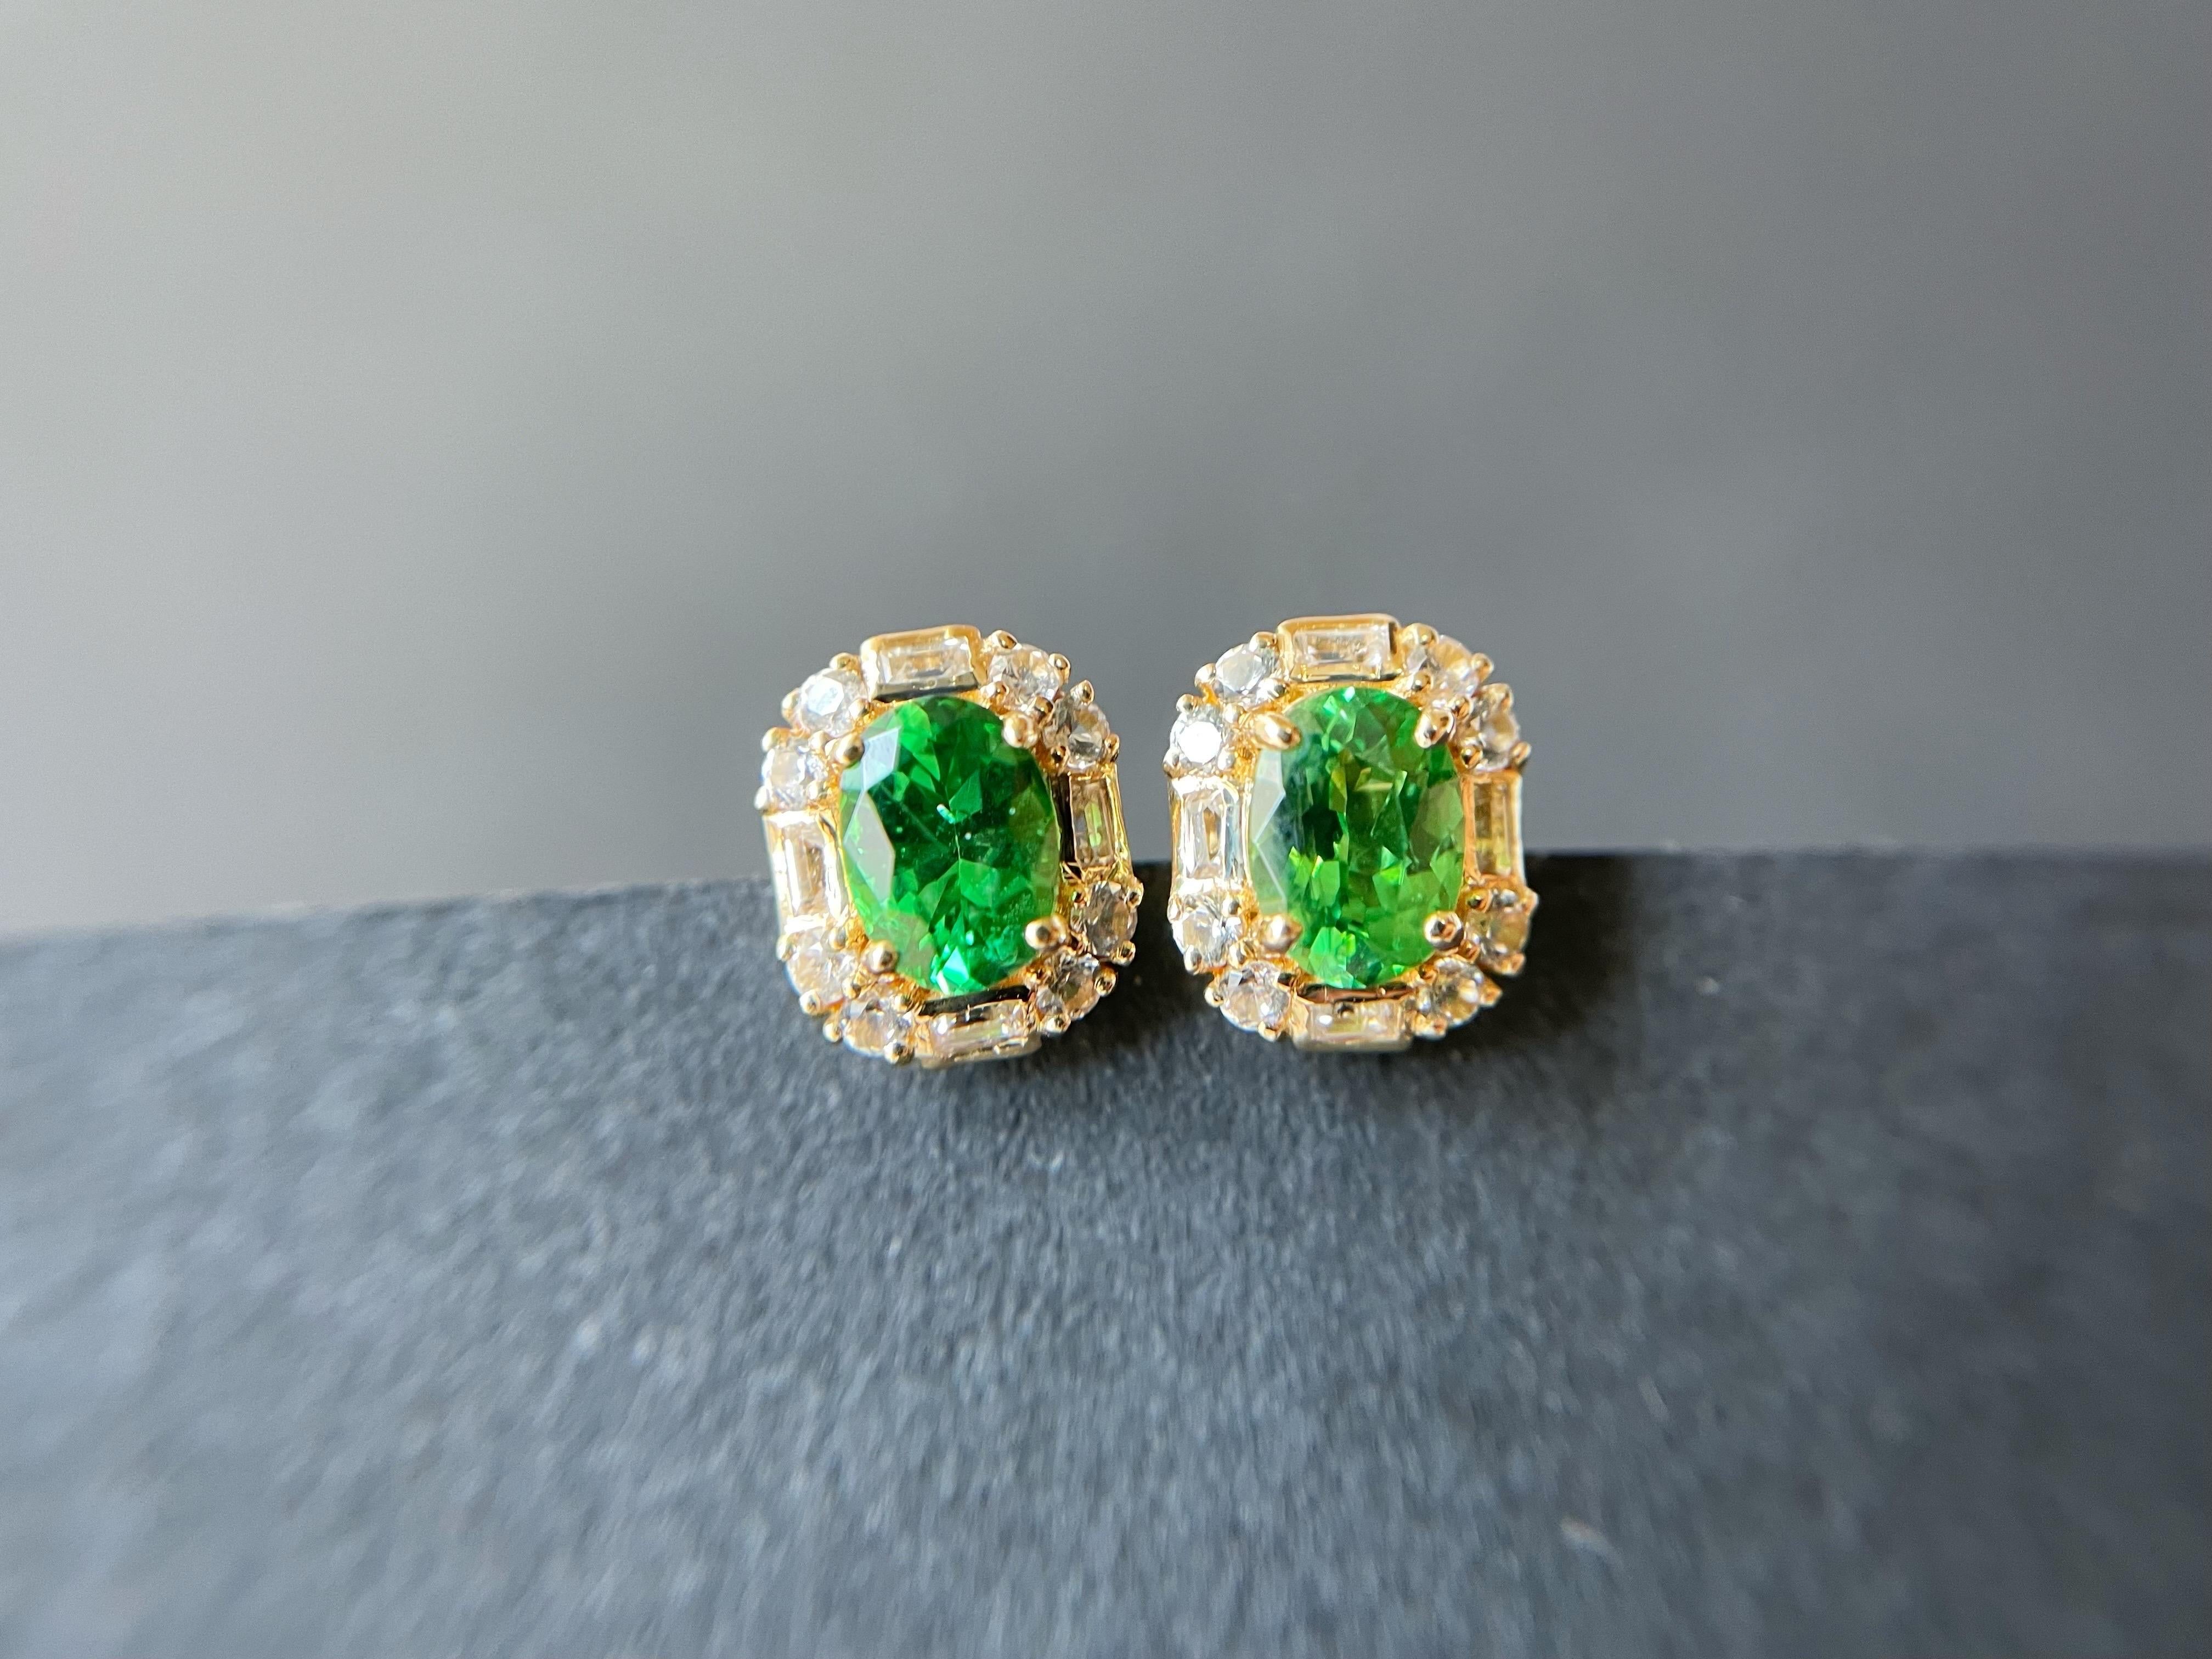 A pair of stunning natural vivid green tsavorite ear studs are set in 18K gold and white sapphires.  A timeless and simple style is a great addition to your jewelry collection that you can wear with something casual or elegant all year long.  These